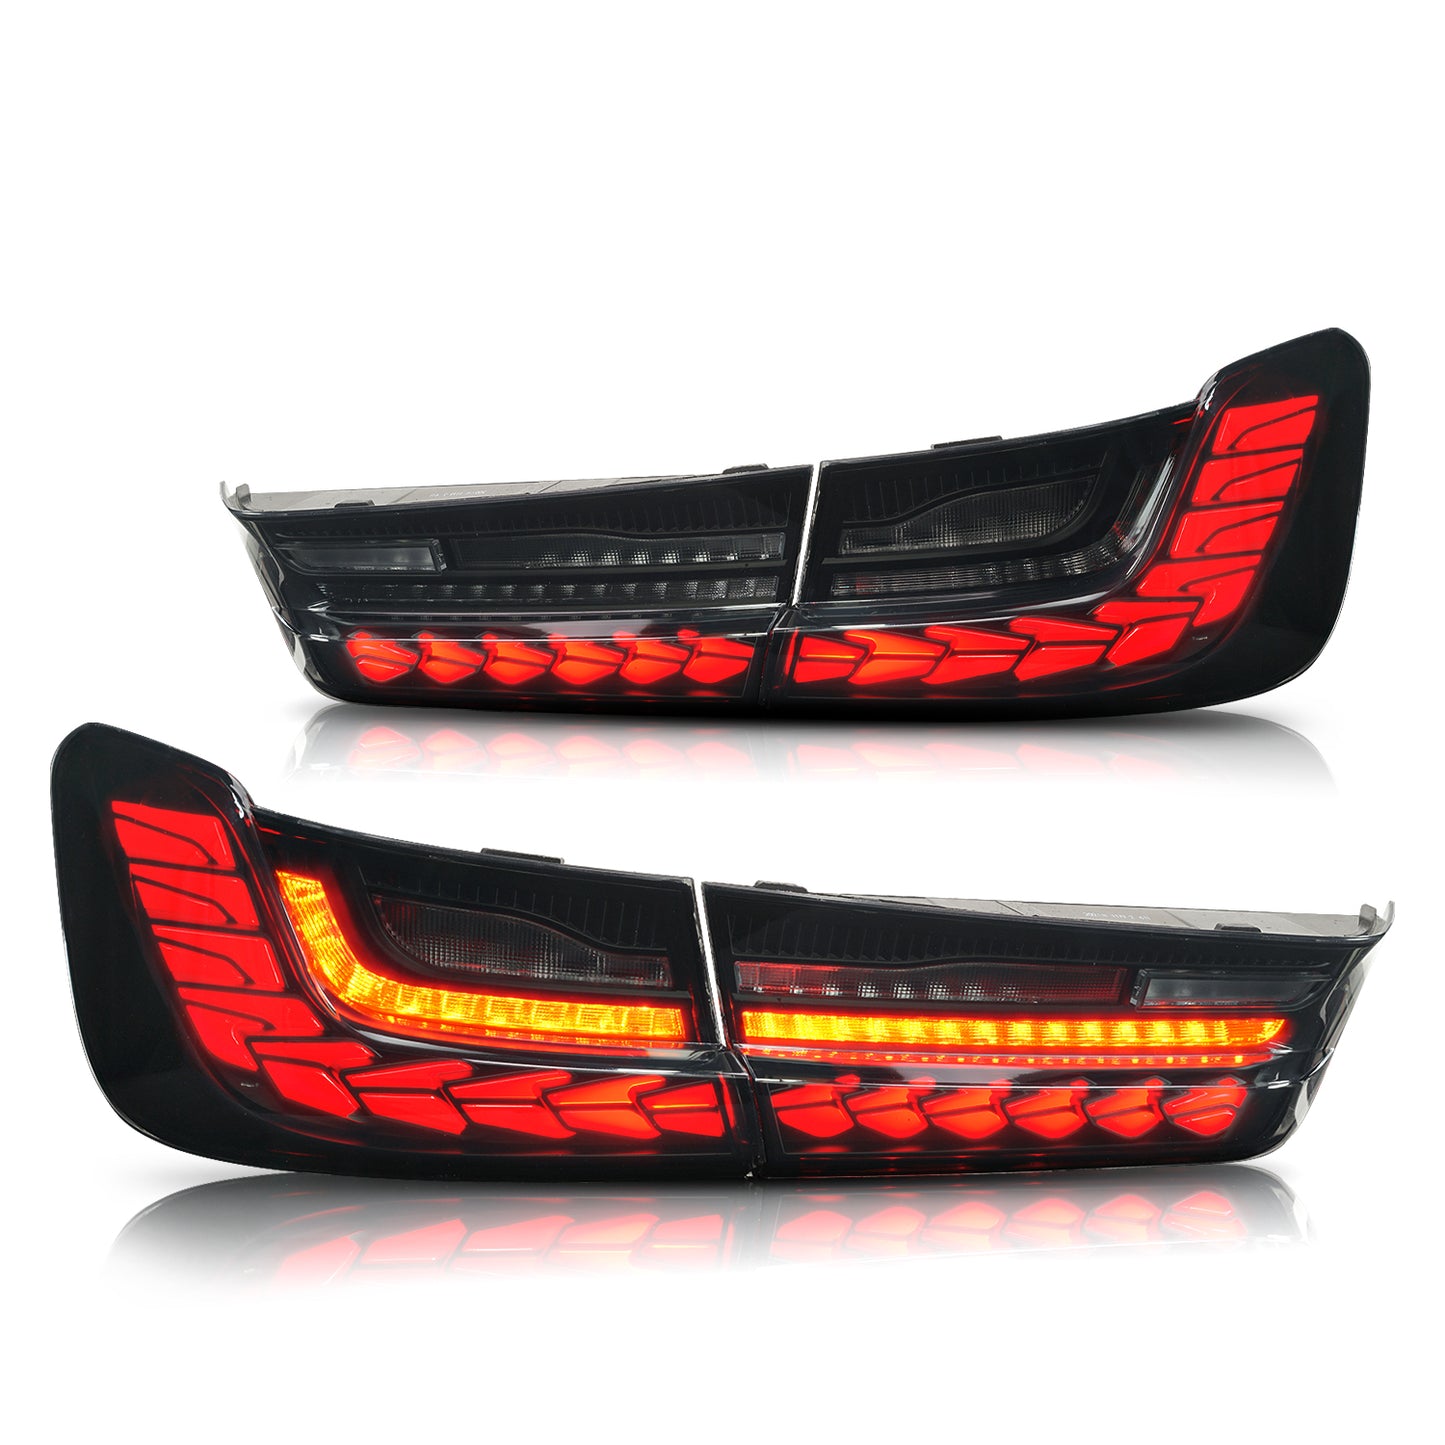 Full LED Tail Lights Assembly For BMW 3 Series G20 2019-2022